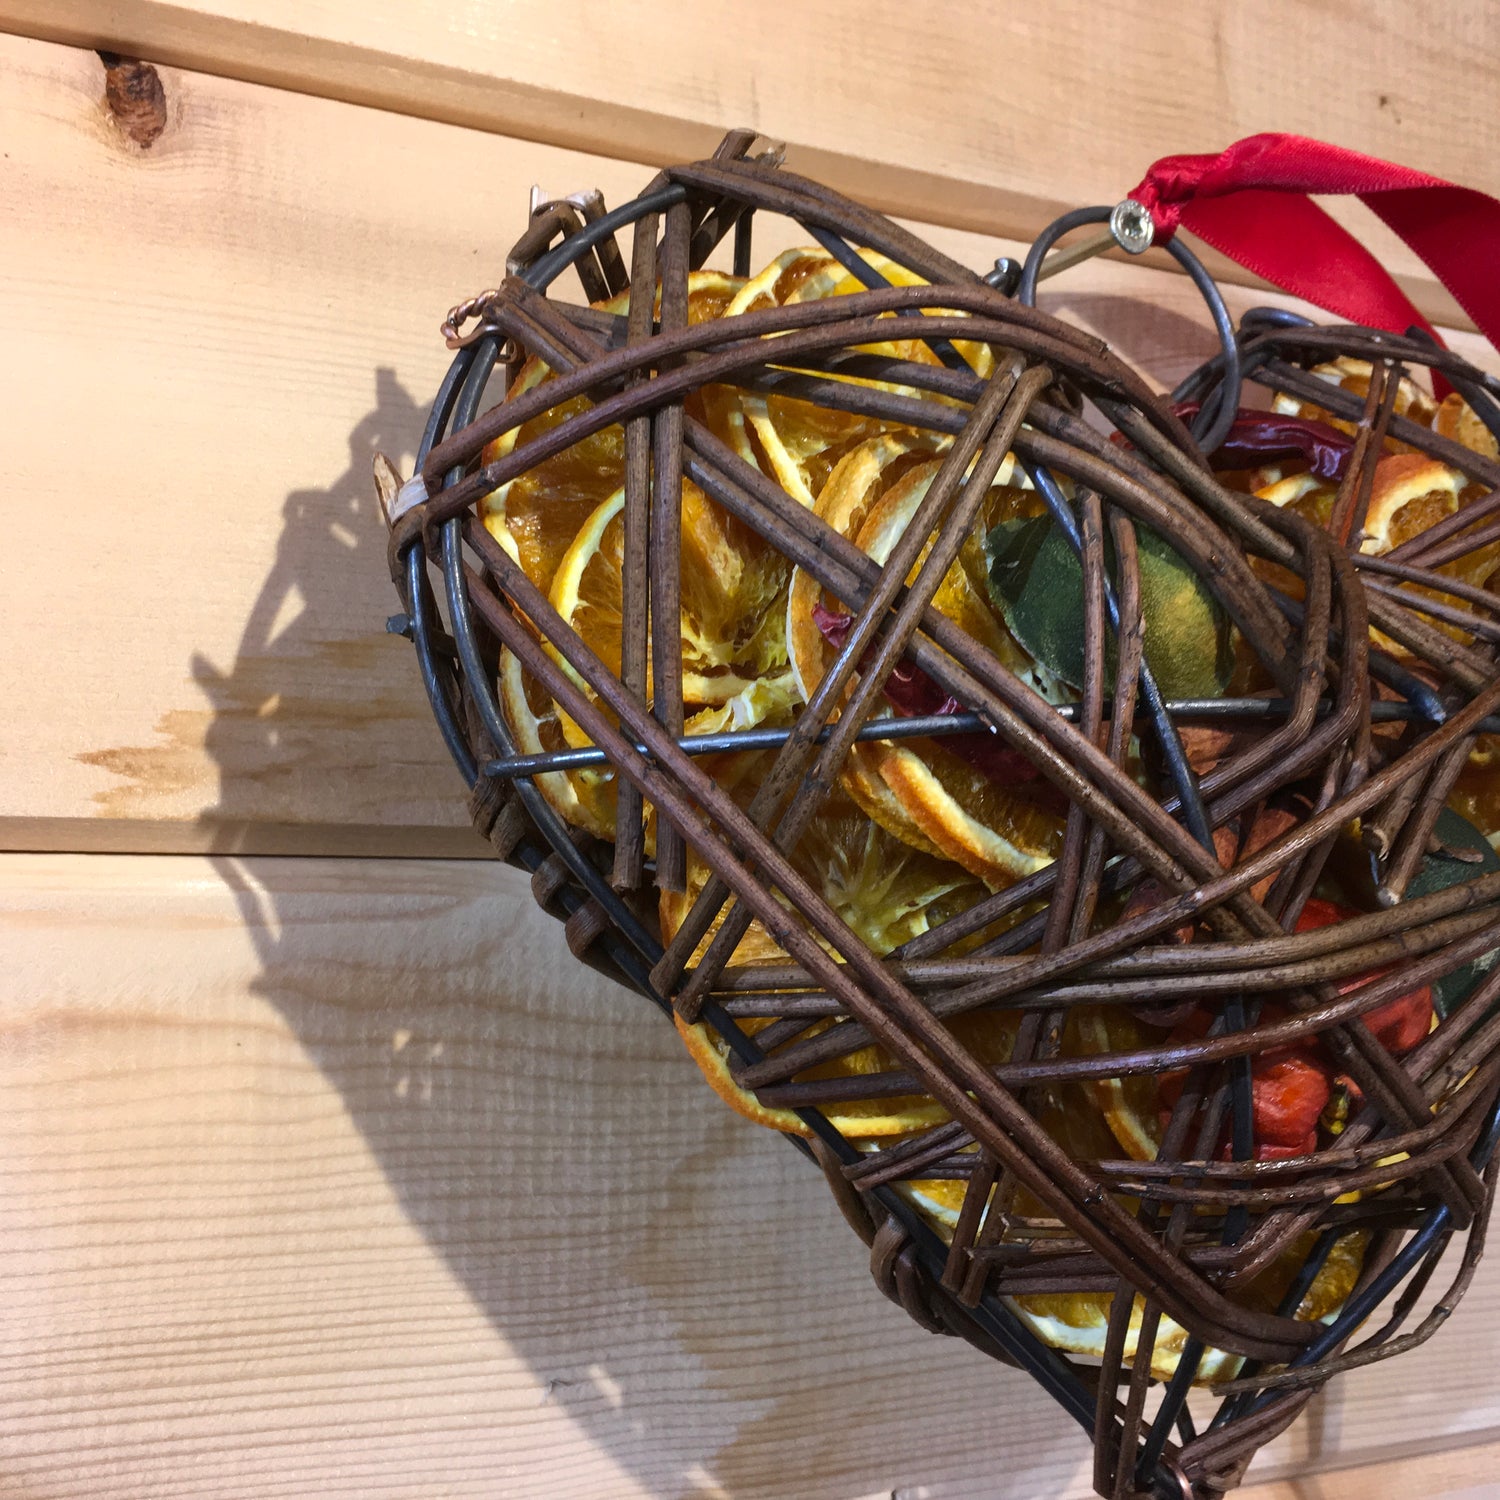 Beautiful heart shaped wicker case filled with dried fruits and scented with a wonderful Christmas fragrance.